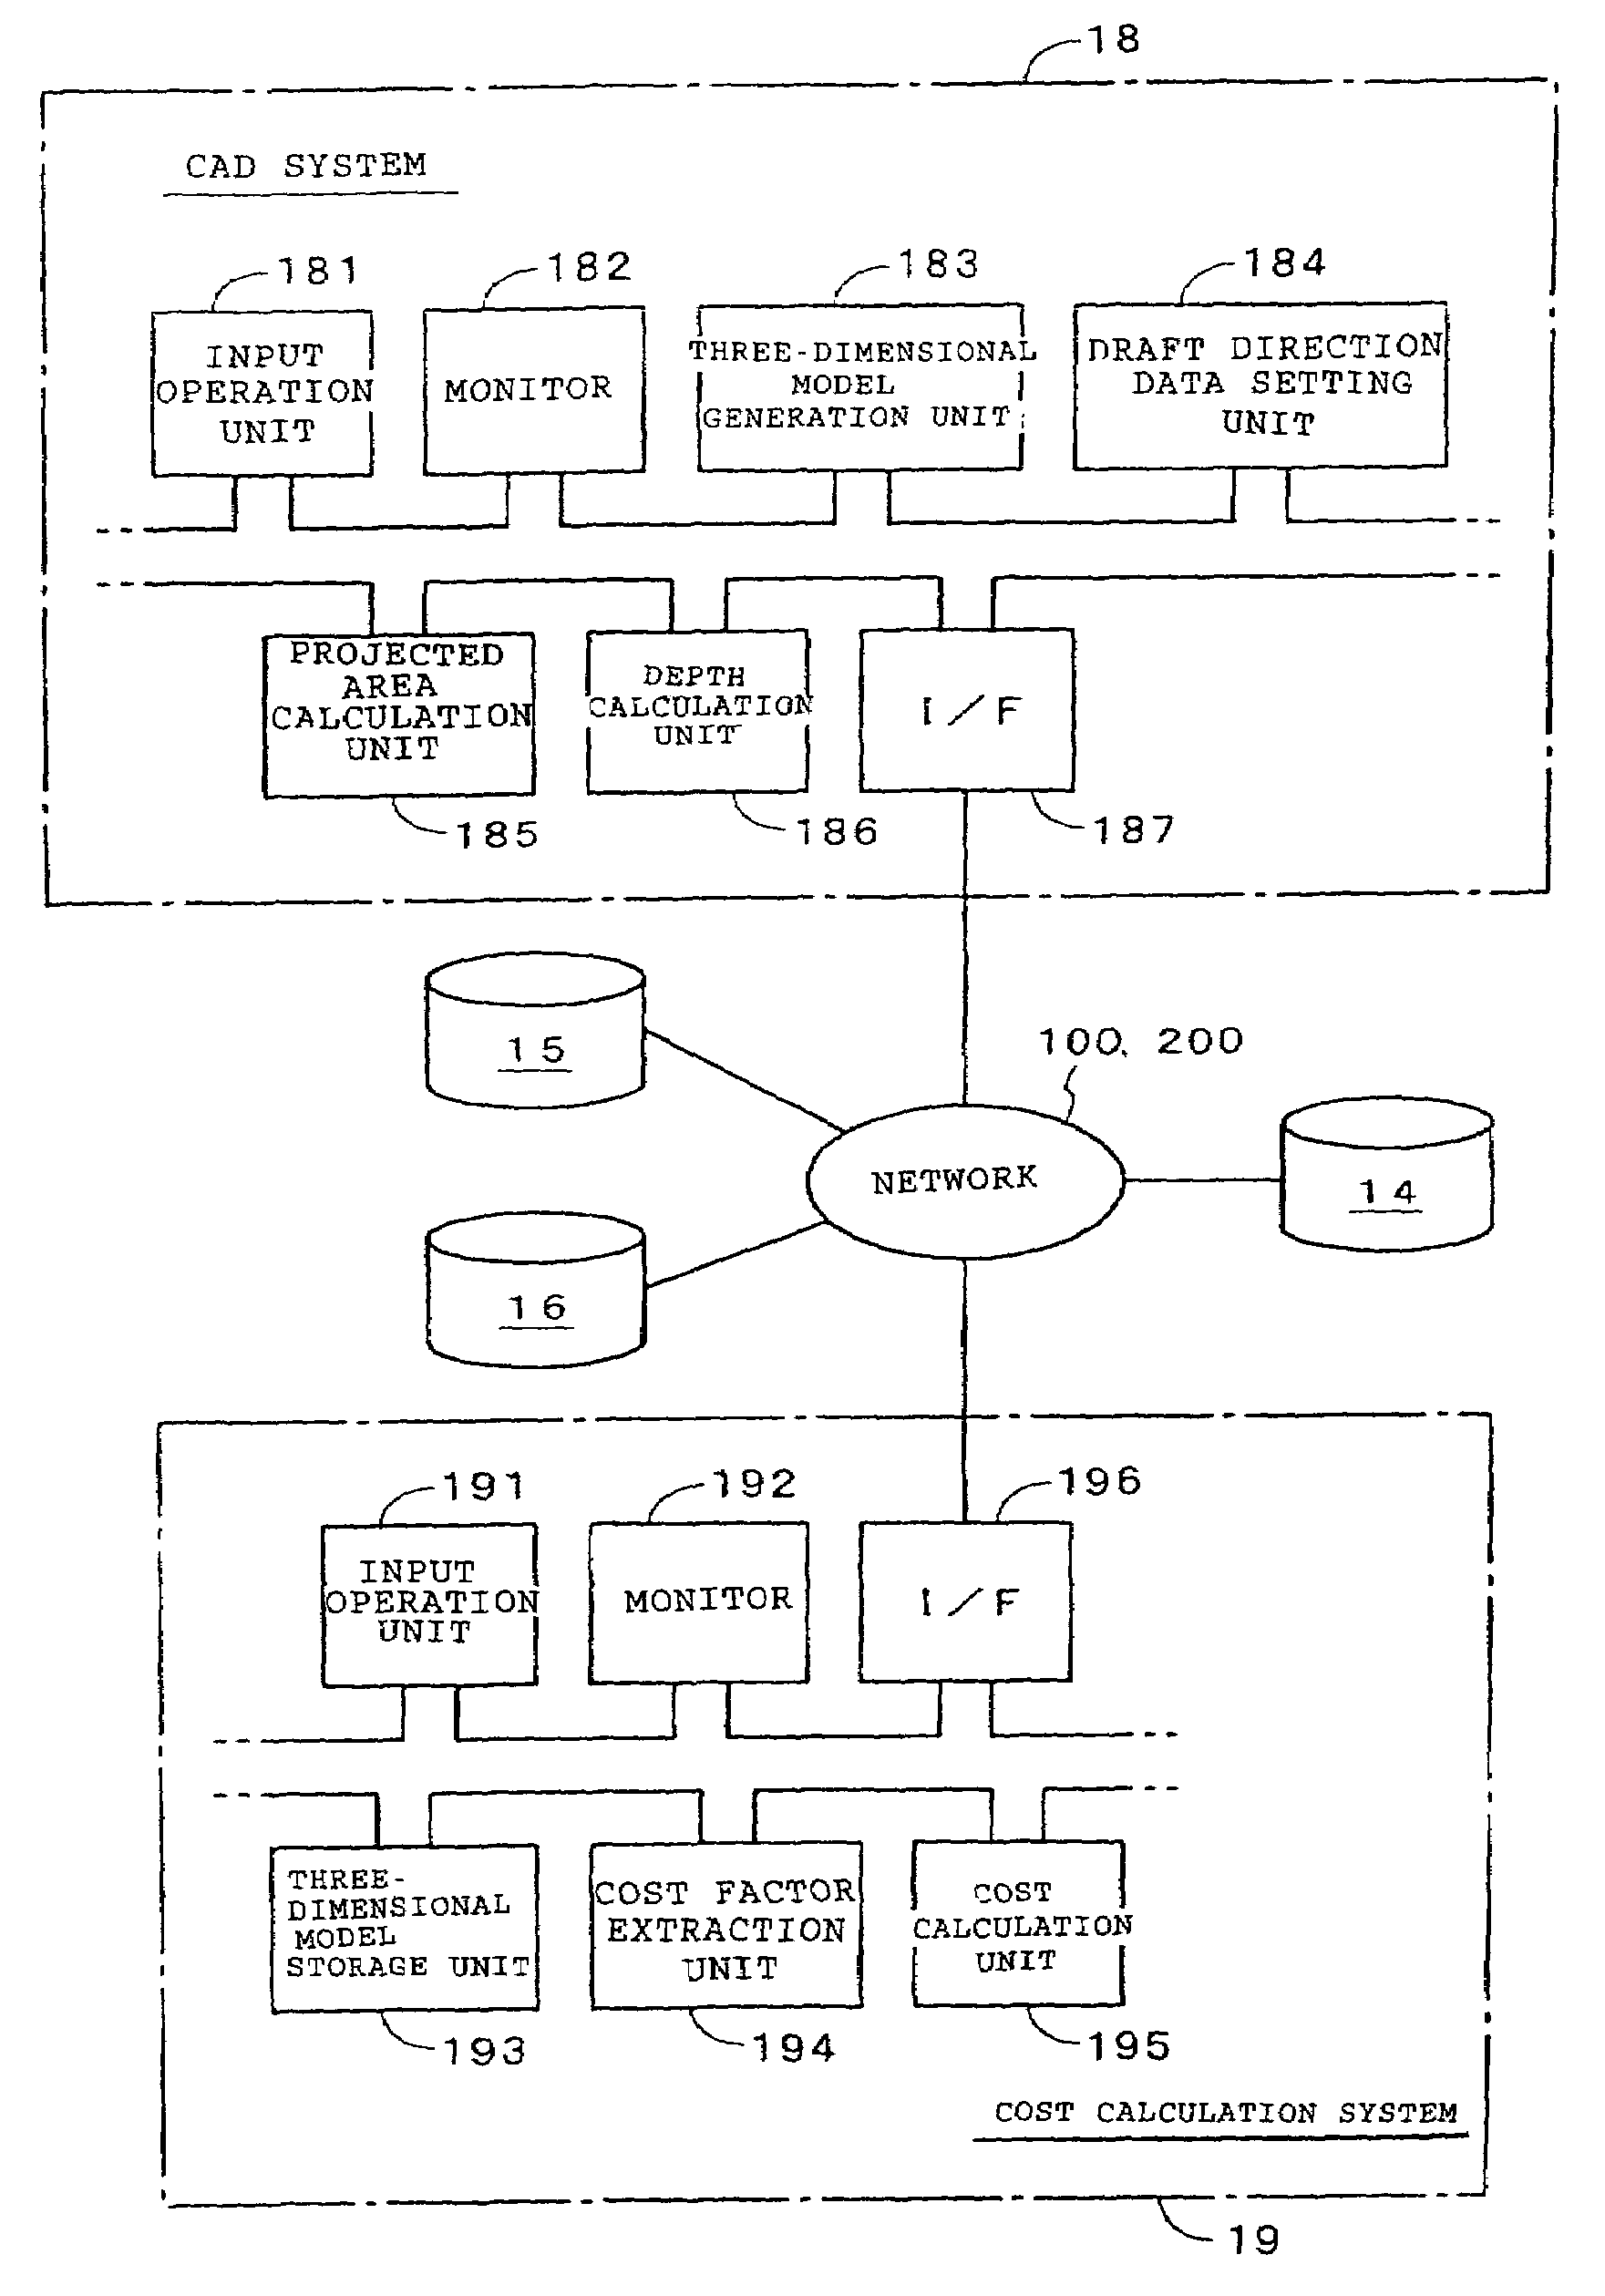 Three-dimensional CAD system and part cost calculation system